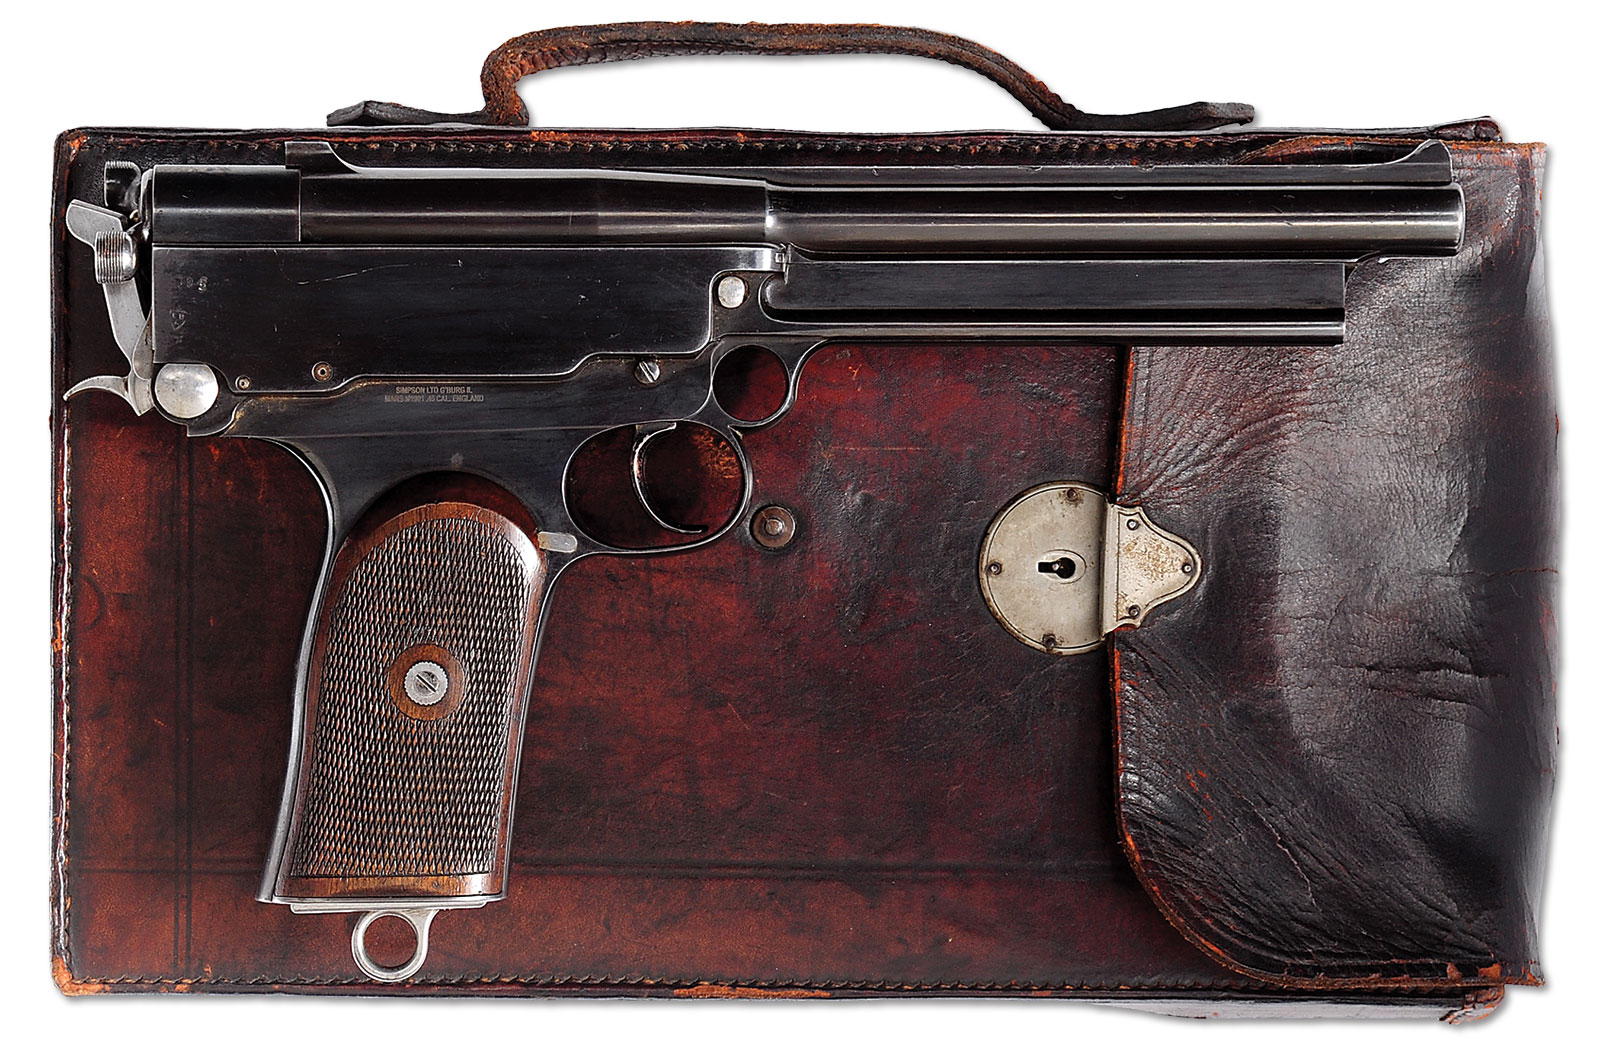 Uniquely Cased Gabbet-Fairfax Mars M1901, from the Dr. Geoff Sturgess Collection of Zurich, Switzerland; estimated at $40,000-60,000, sold for $69,000.